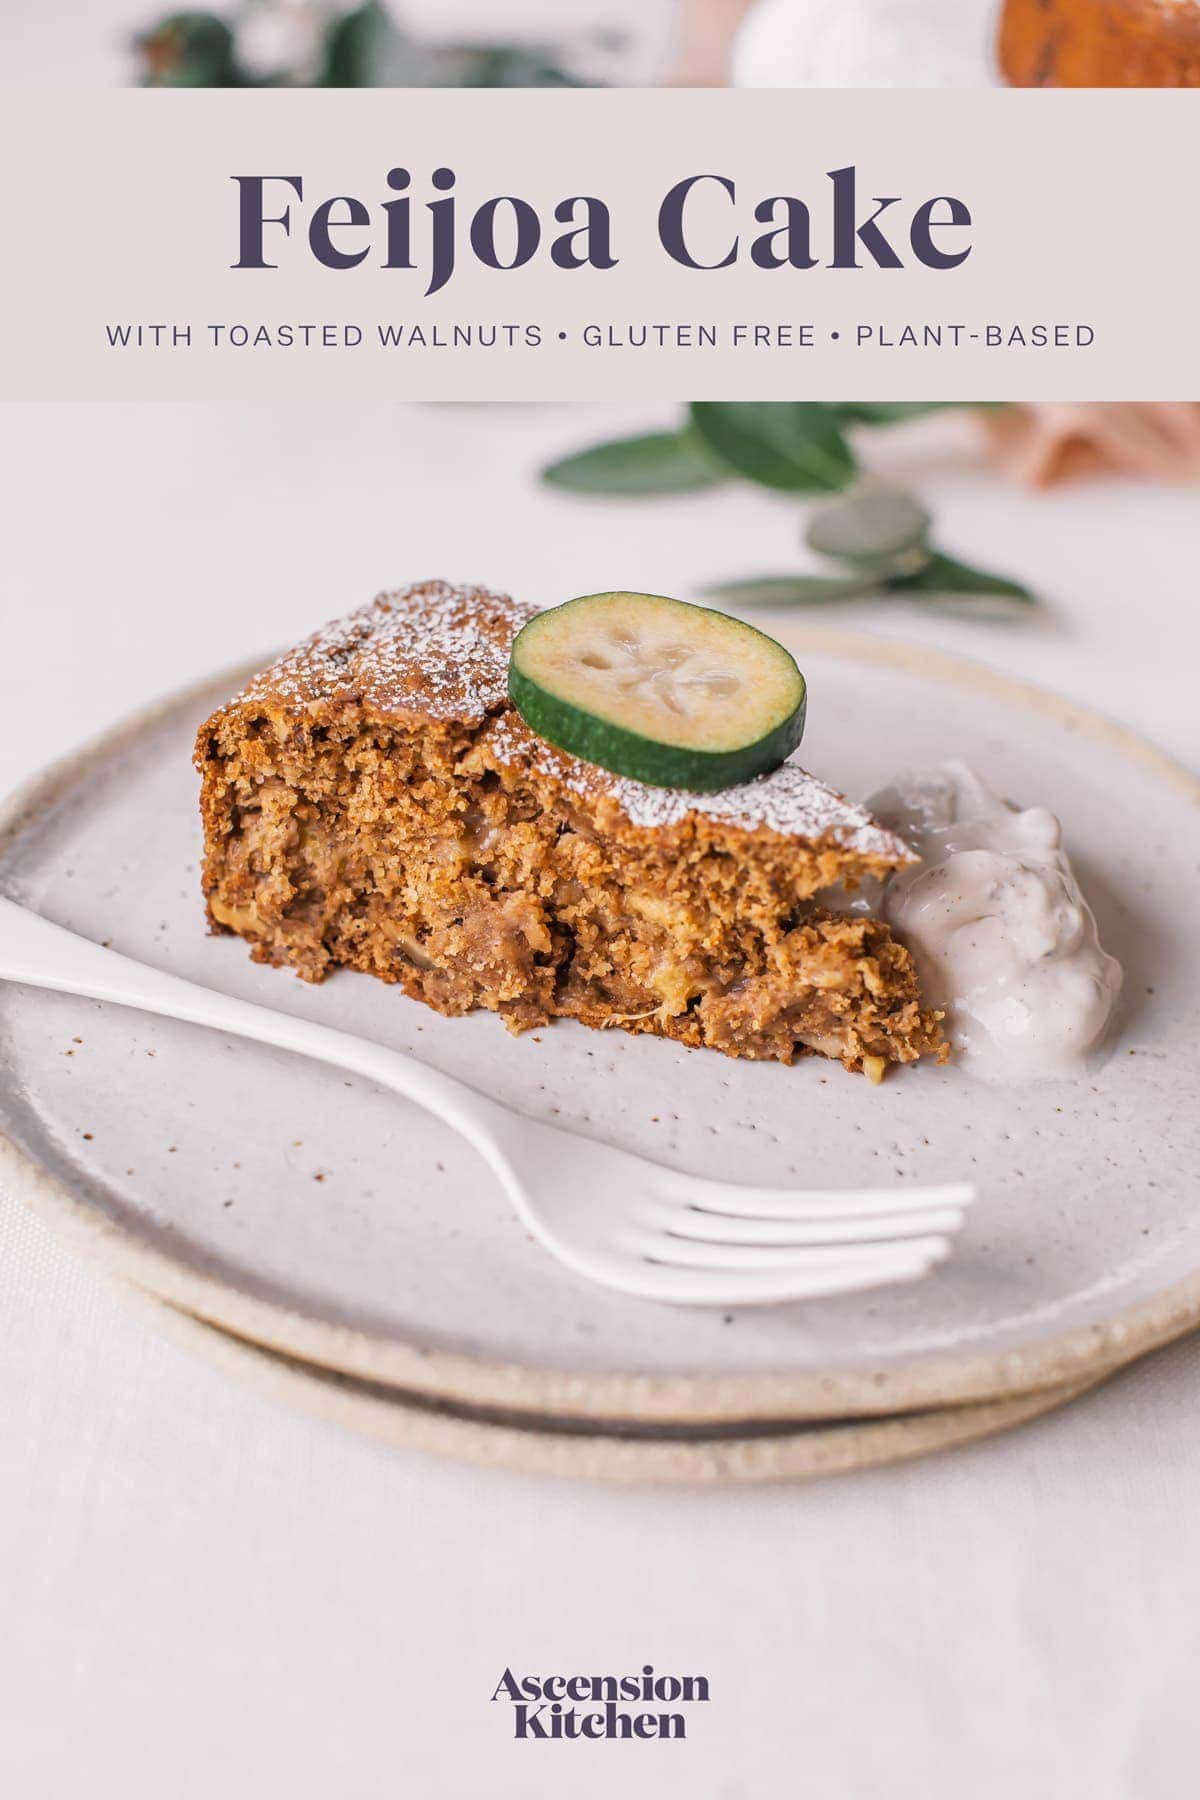 Hero shot of a slice of feijoa cake, with a dollop of coconut yoghurt on the plate next to it. Text over the top of the image reads "Feijoa Cake with toasted walnuts. Gluten free, plant-based."